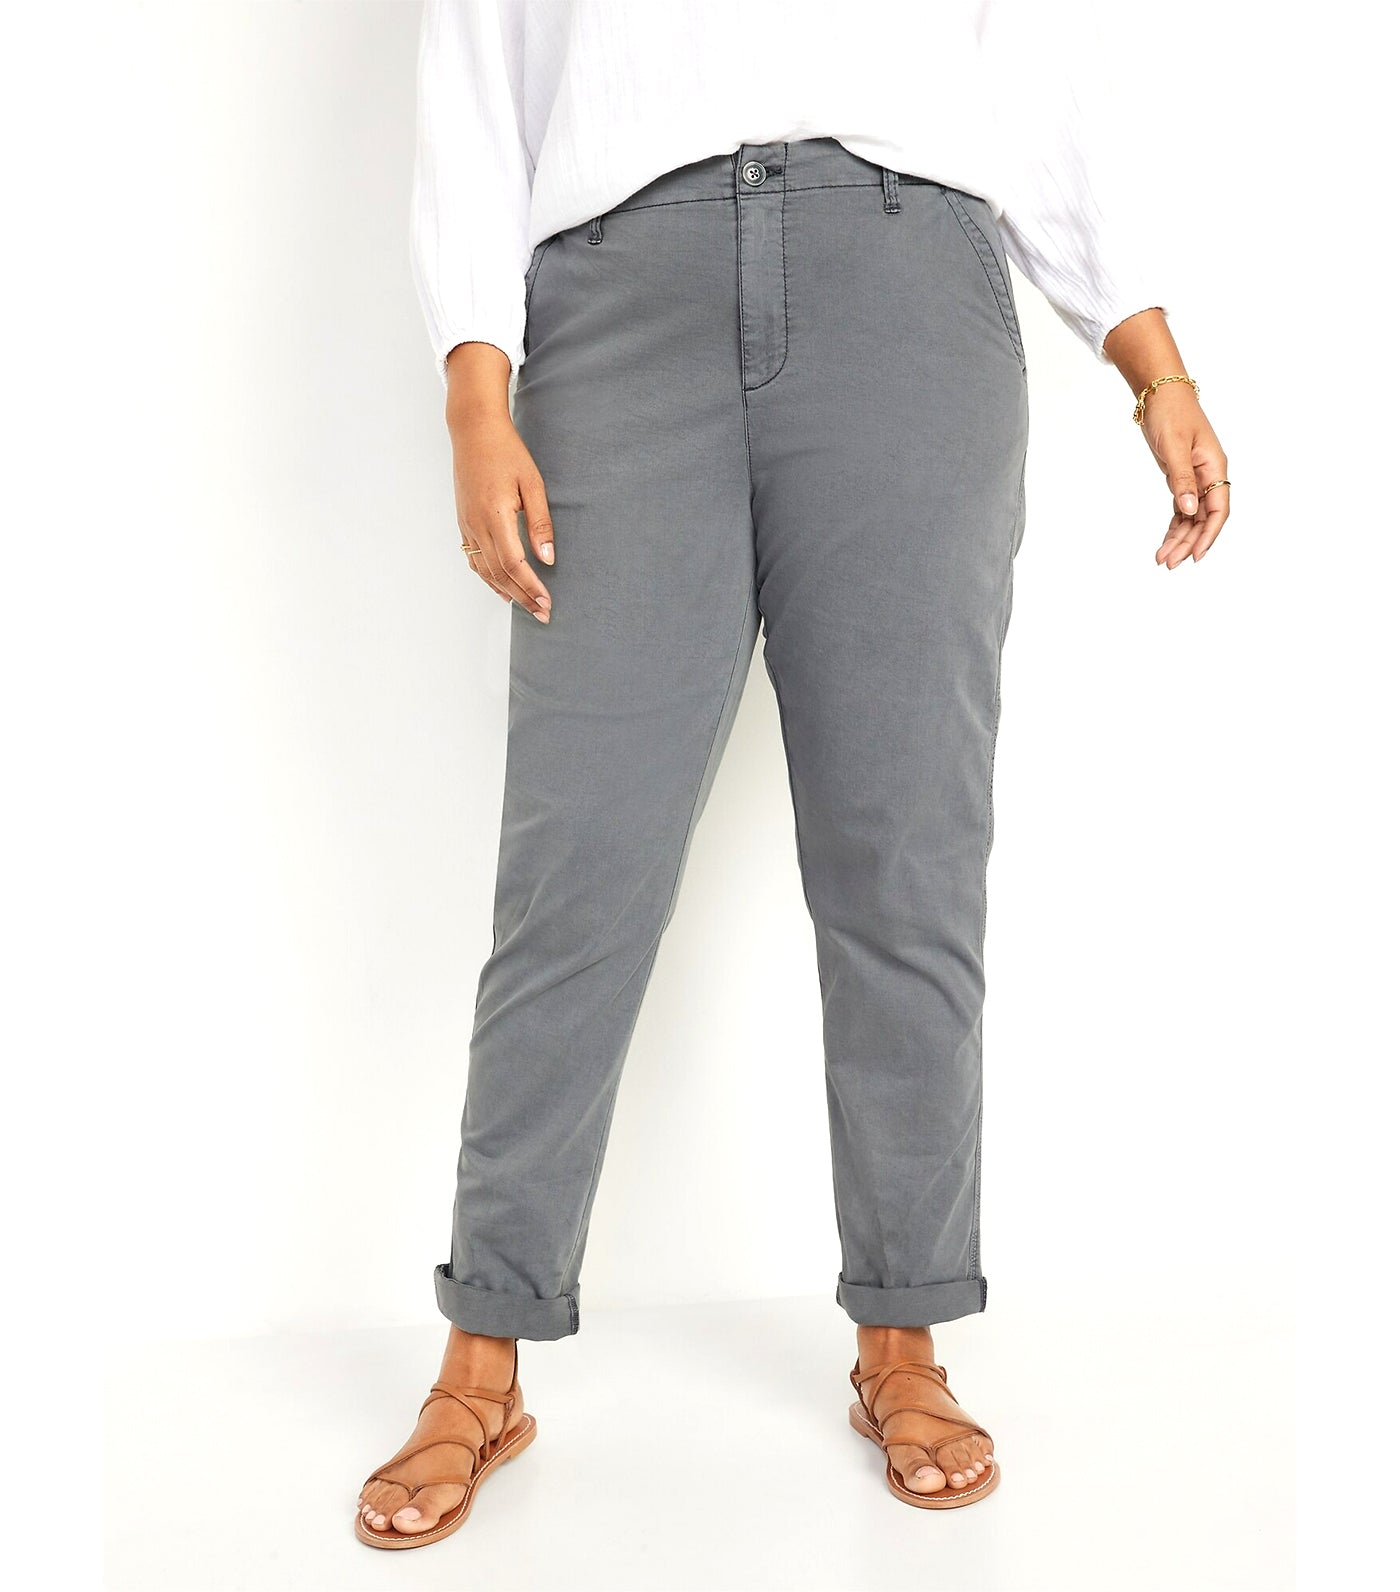 High-Waisted OGC Chino Pants for Women, Old Navy